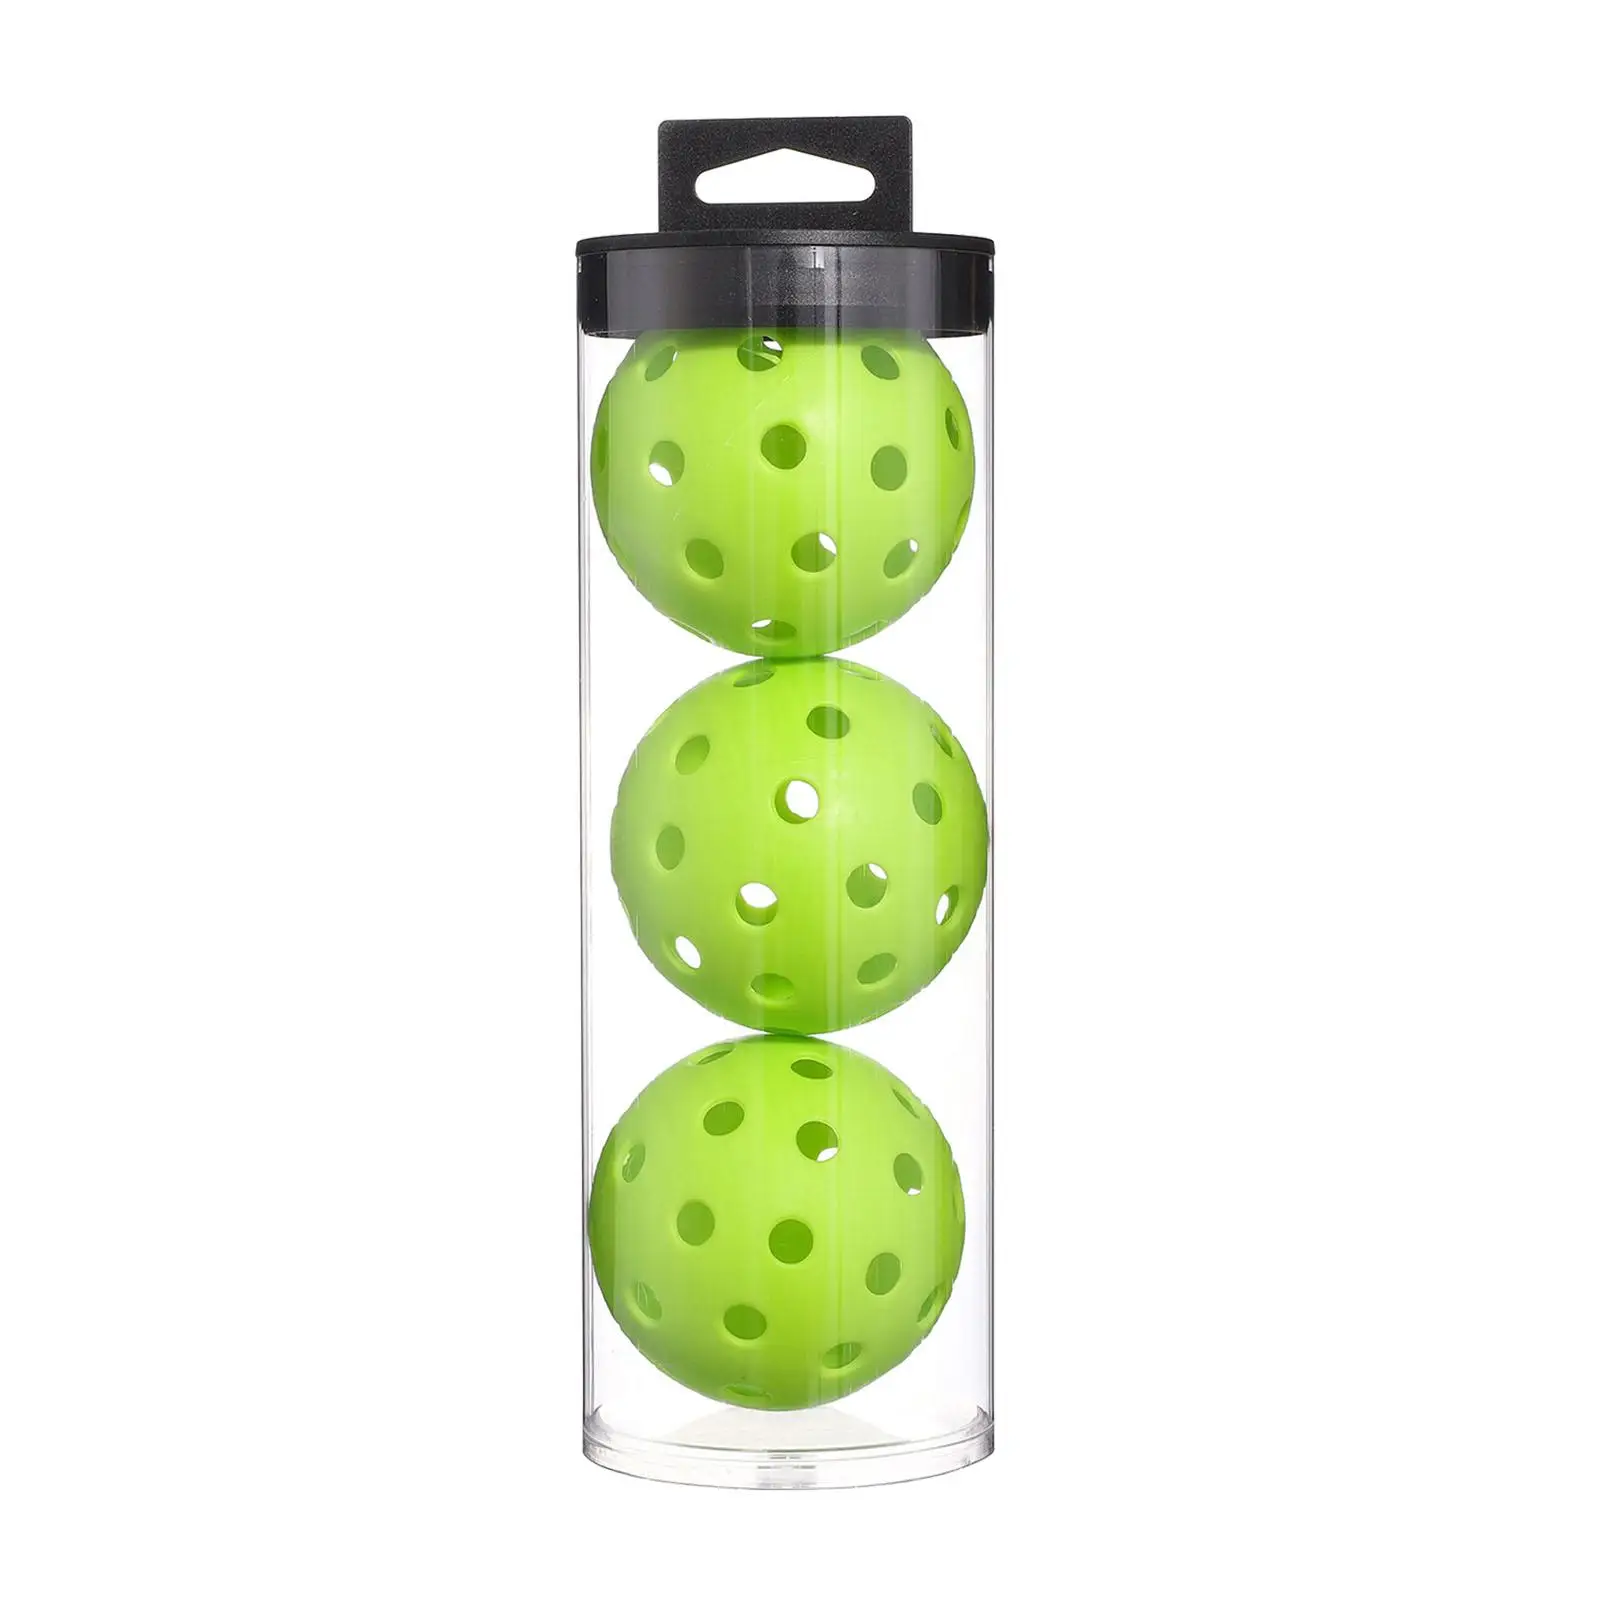 3x Pickleball Ball Professional Golf Hollow Ball with 40 Holes Durable Pickleball Accessories for Indoor Outdoor Tournament Play